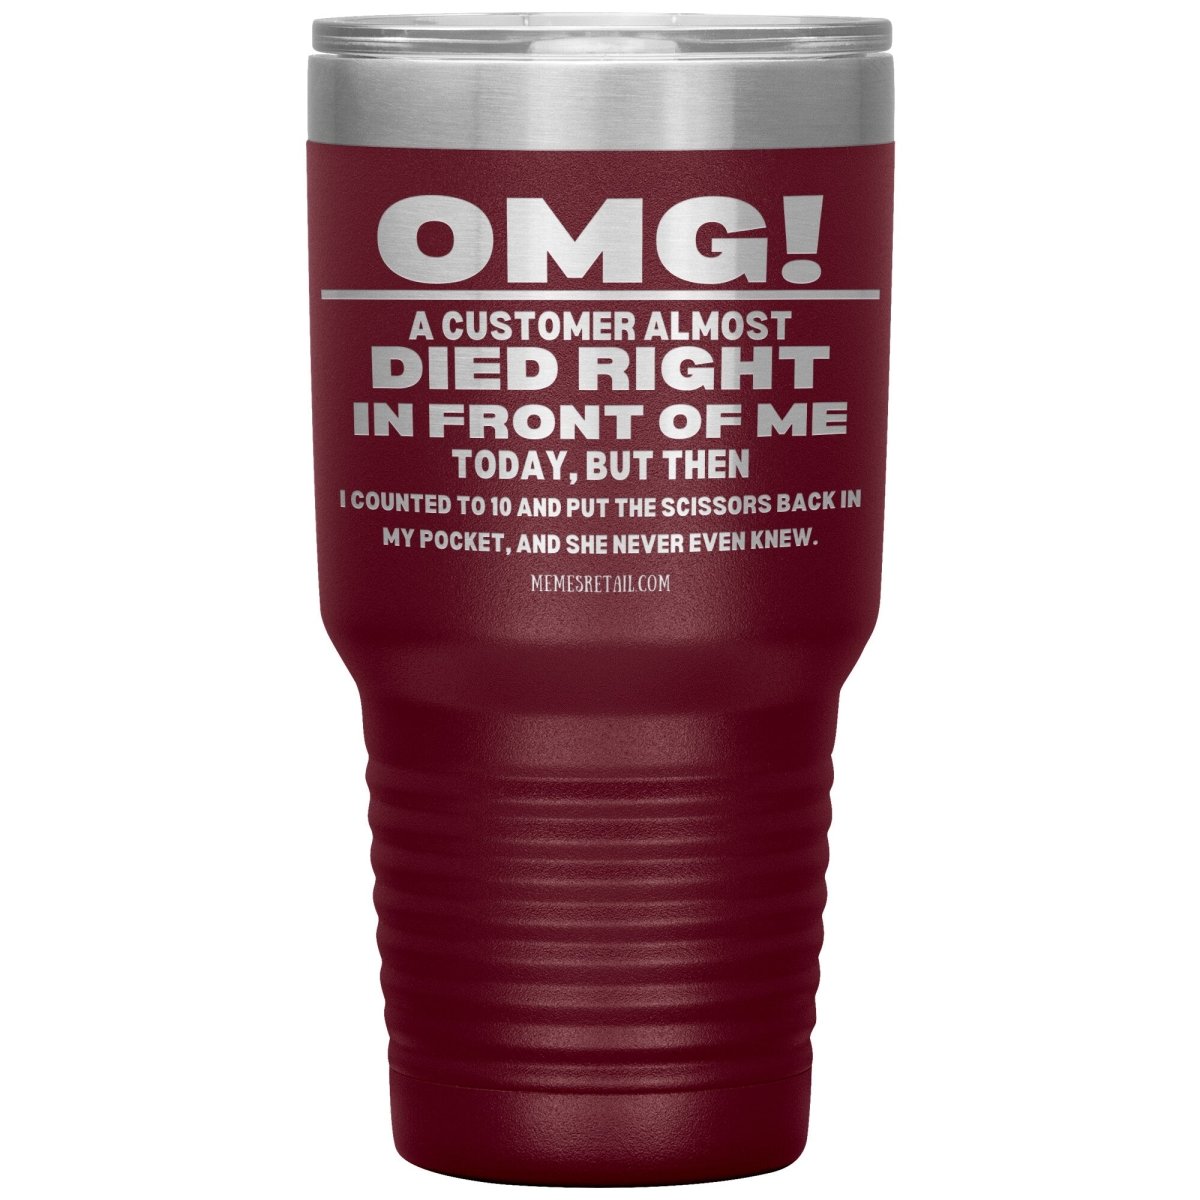 OMG! A Customer Almost Died Right In Front Of Me Tumbler, 30oz Insulated Tumbler / Maroon - MemesRetail.com